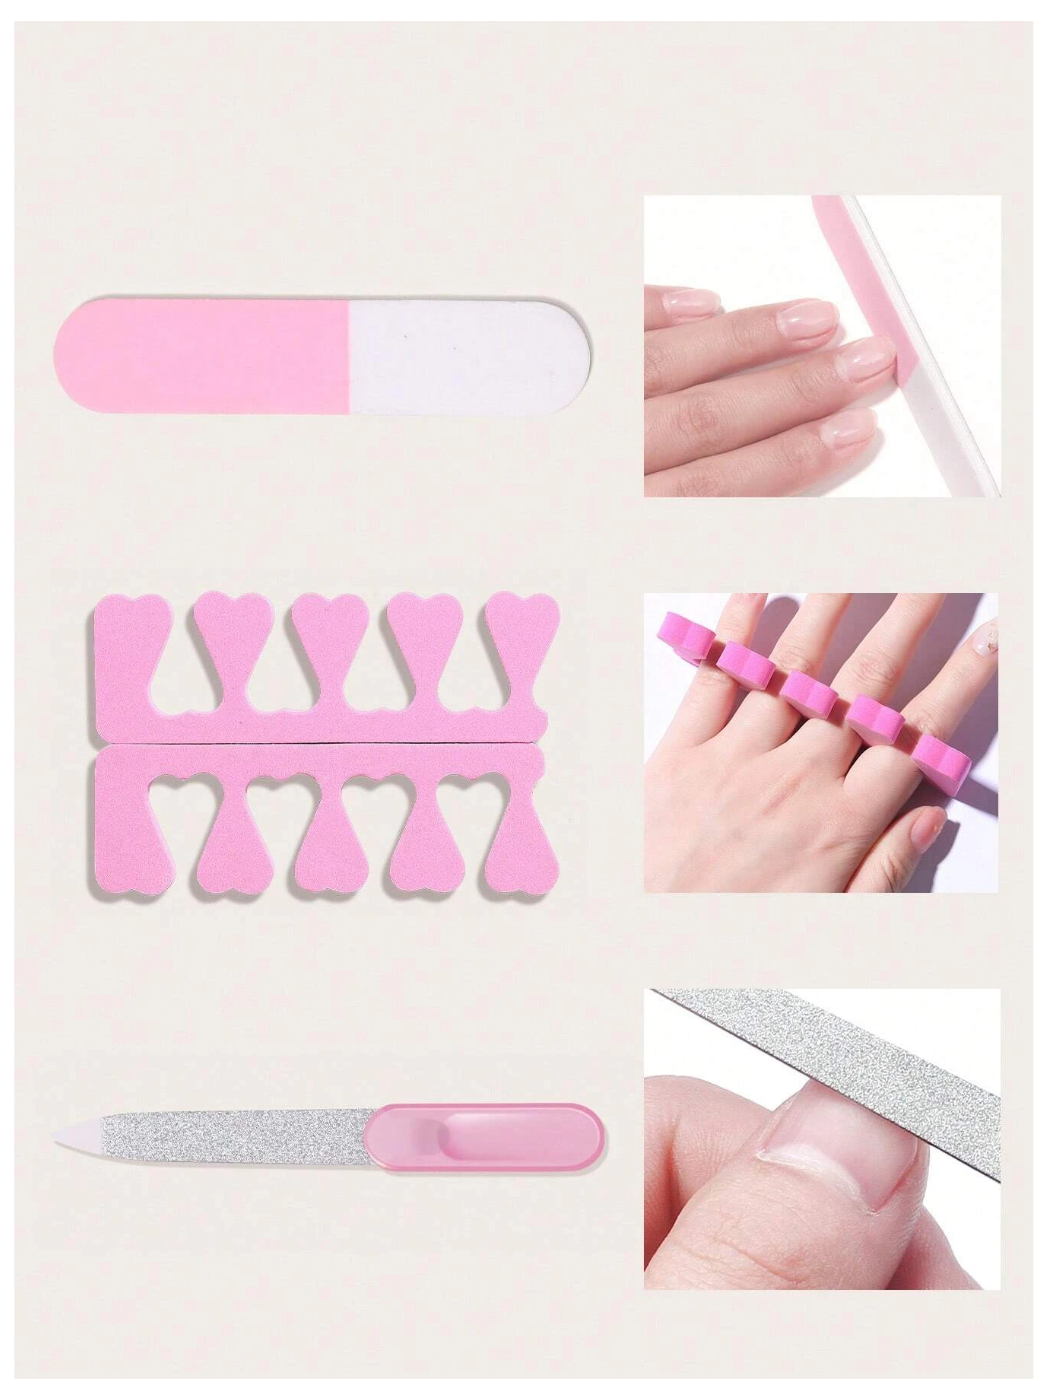 Radiant Nails Kit: 13pcs UV LED Light, Nail Drill Machine, and More - Ultimate Manicure Tools for DIY Glam at Home!